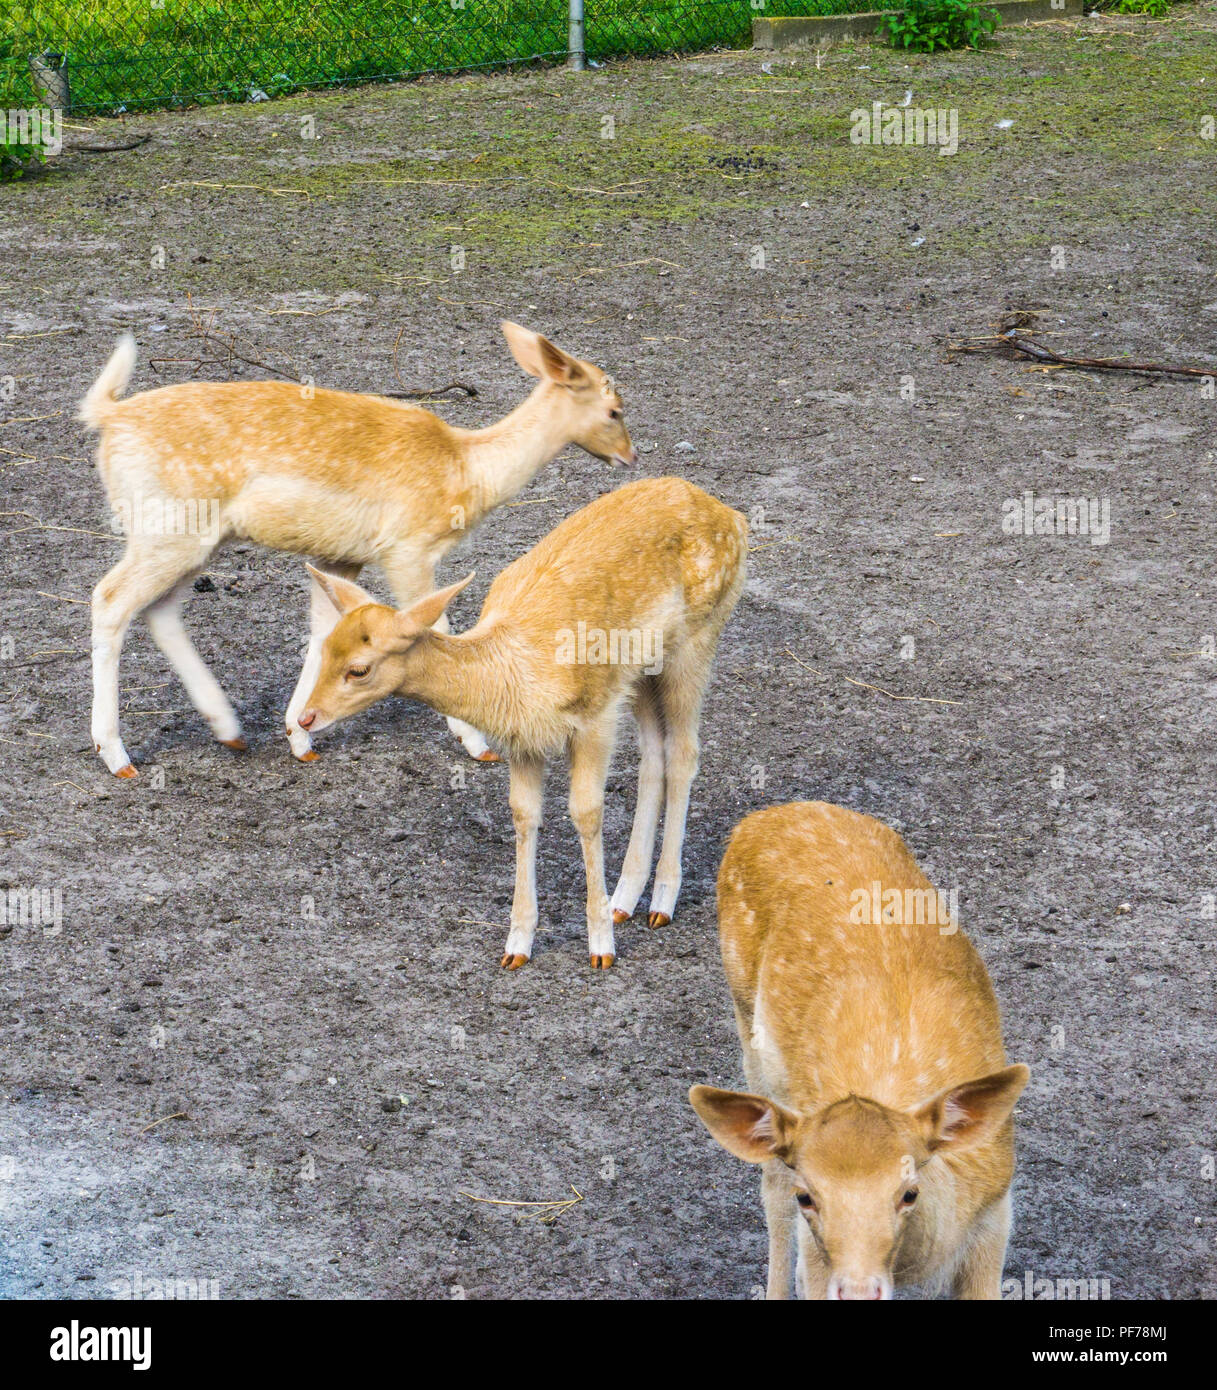 group of young small deer animals at animal farm Stock Photo